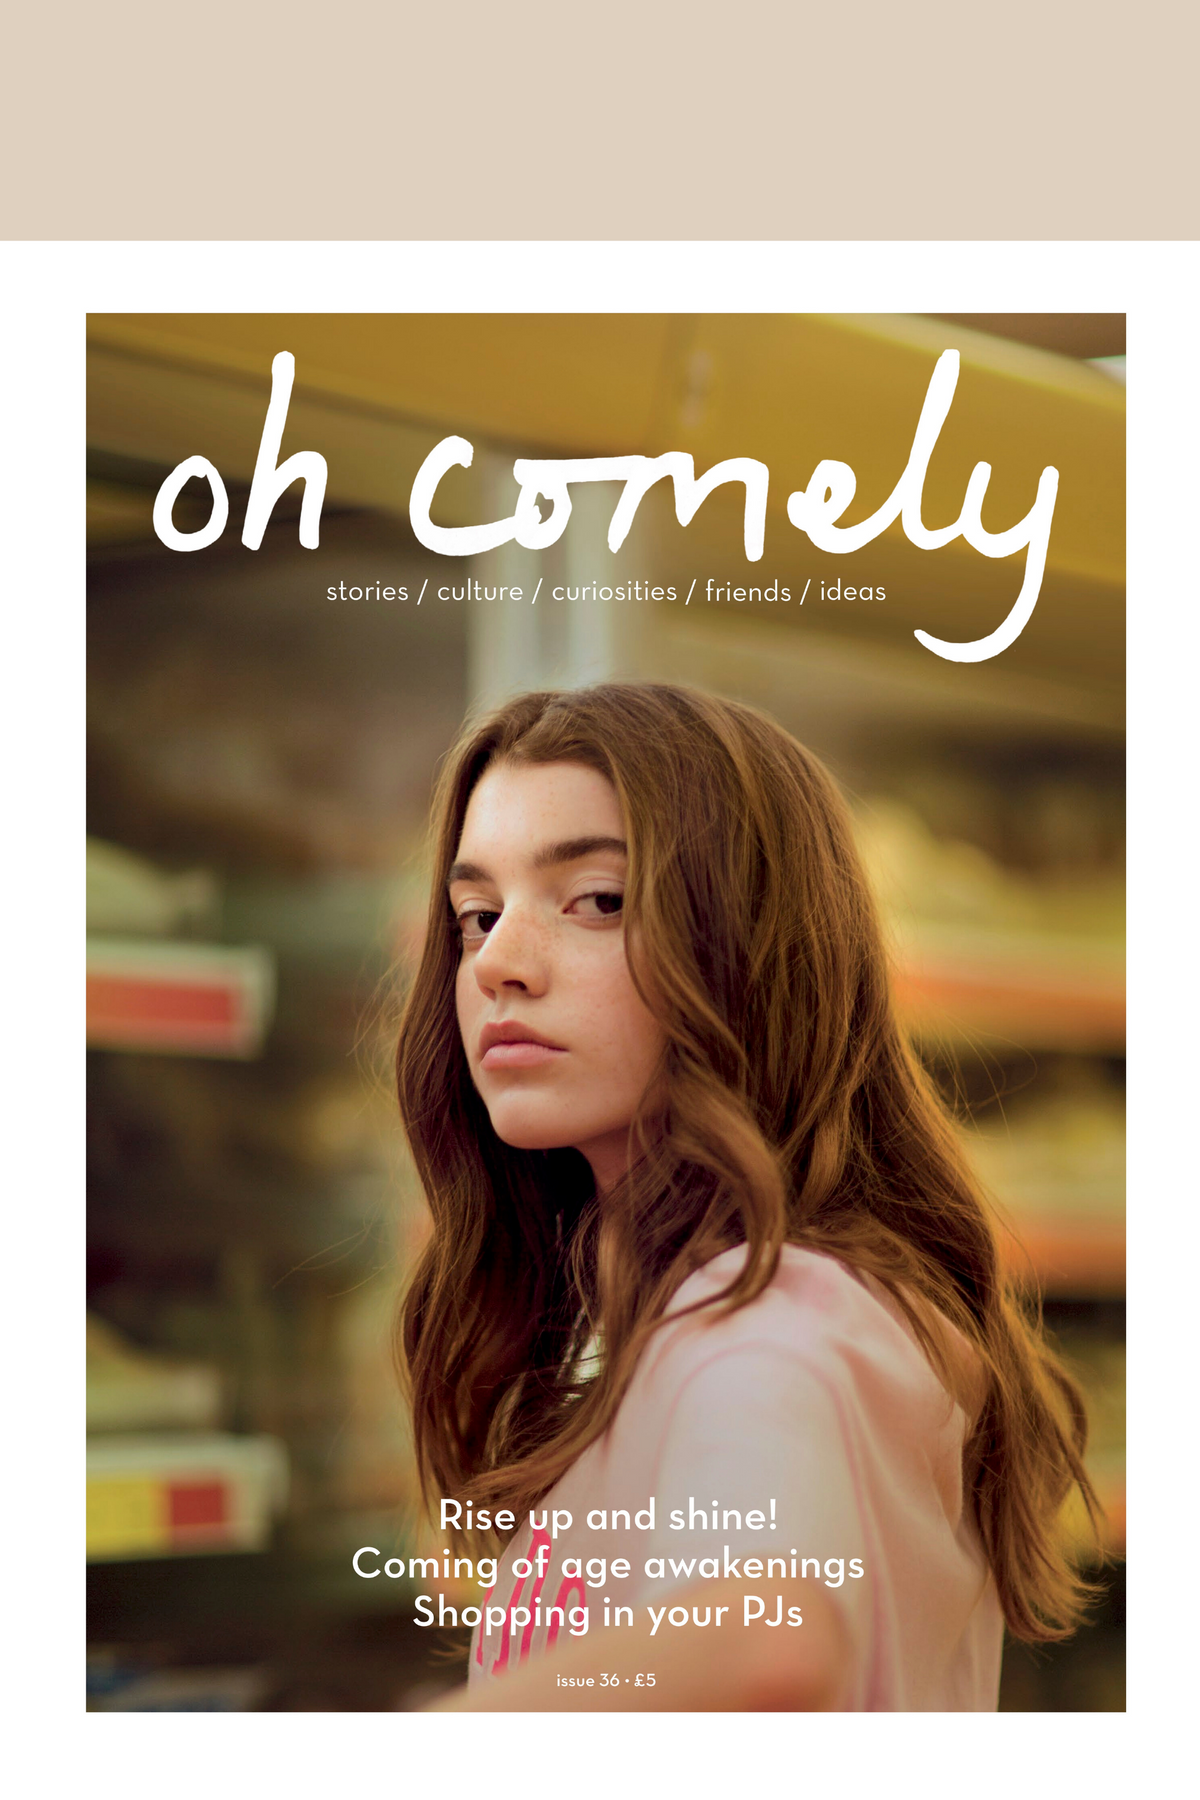 Oh Comely - Issue 36